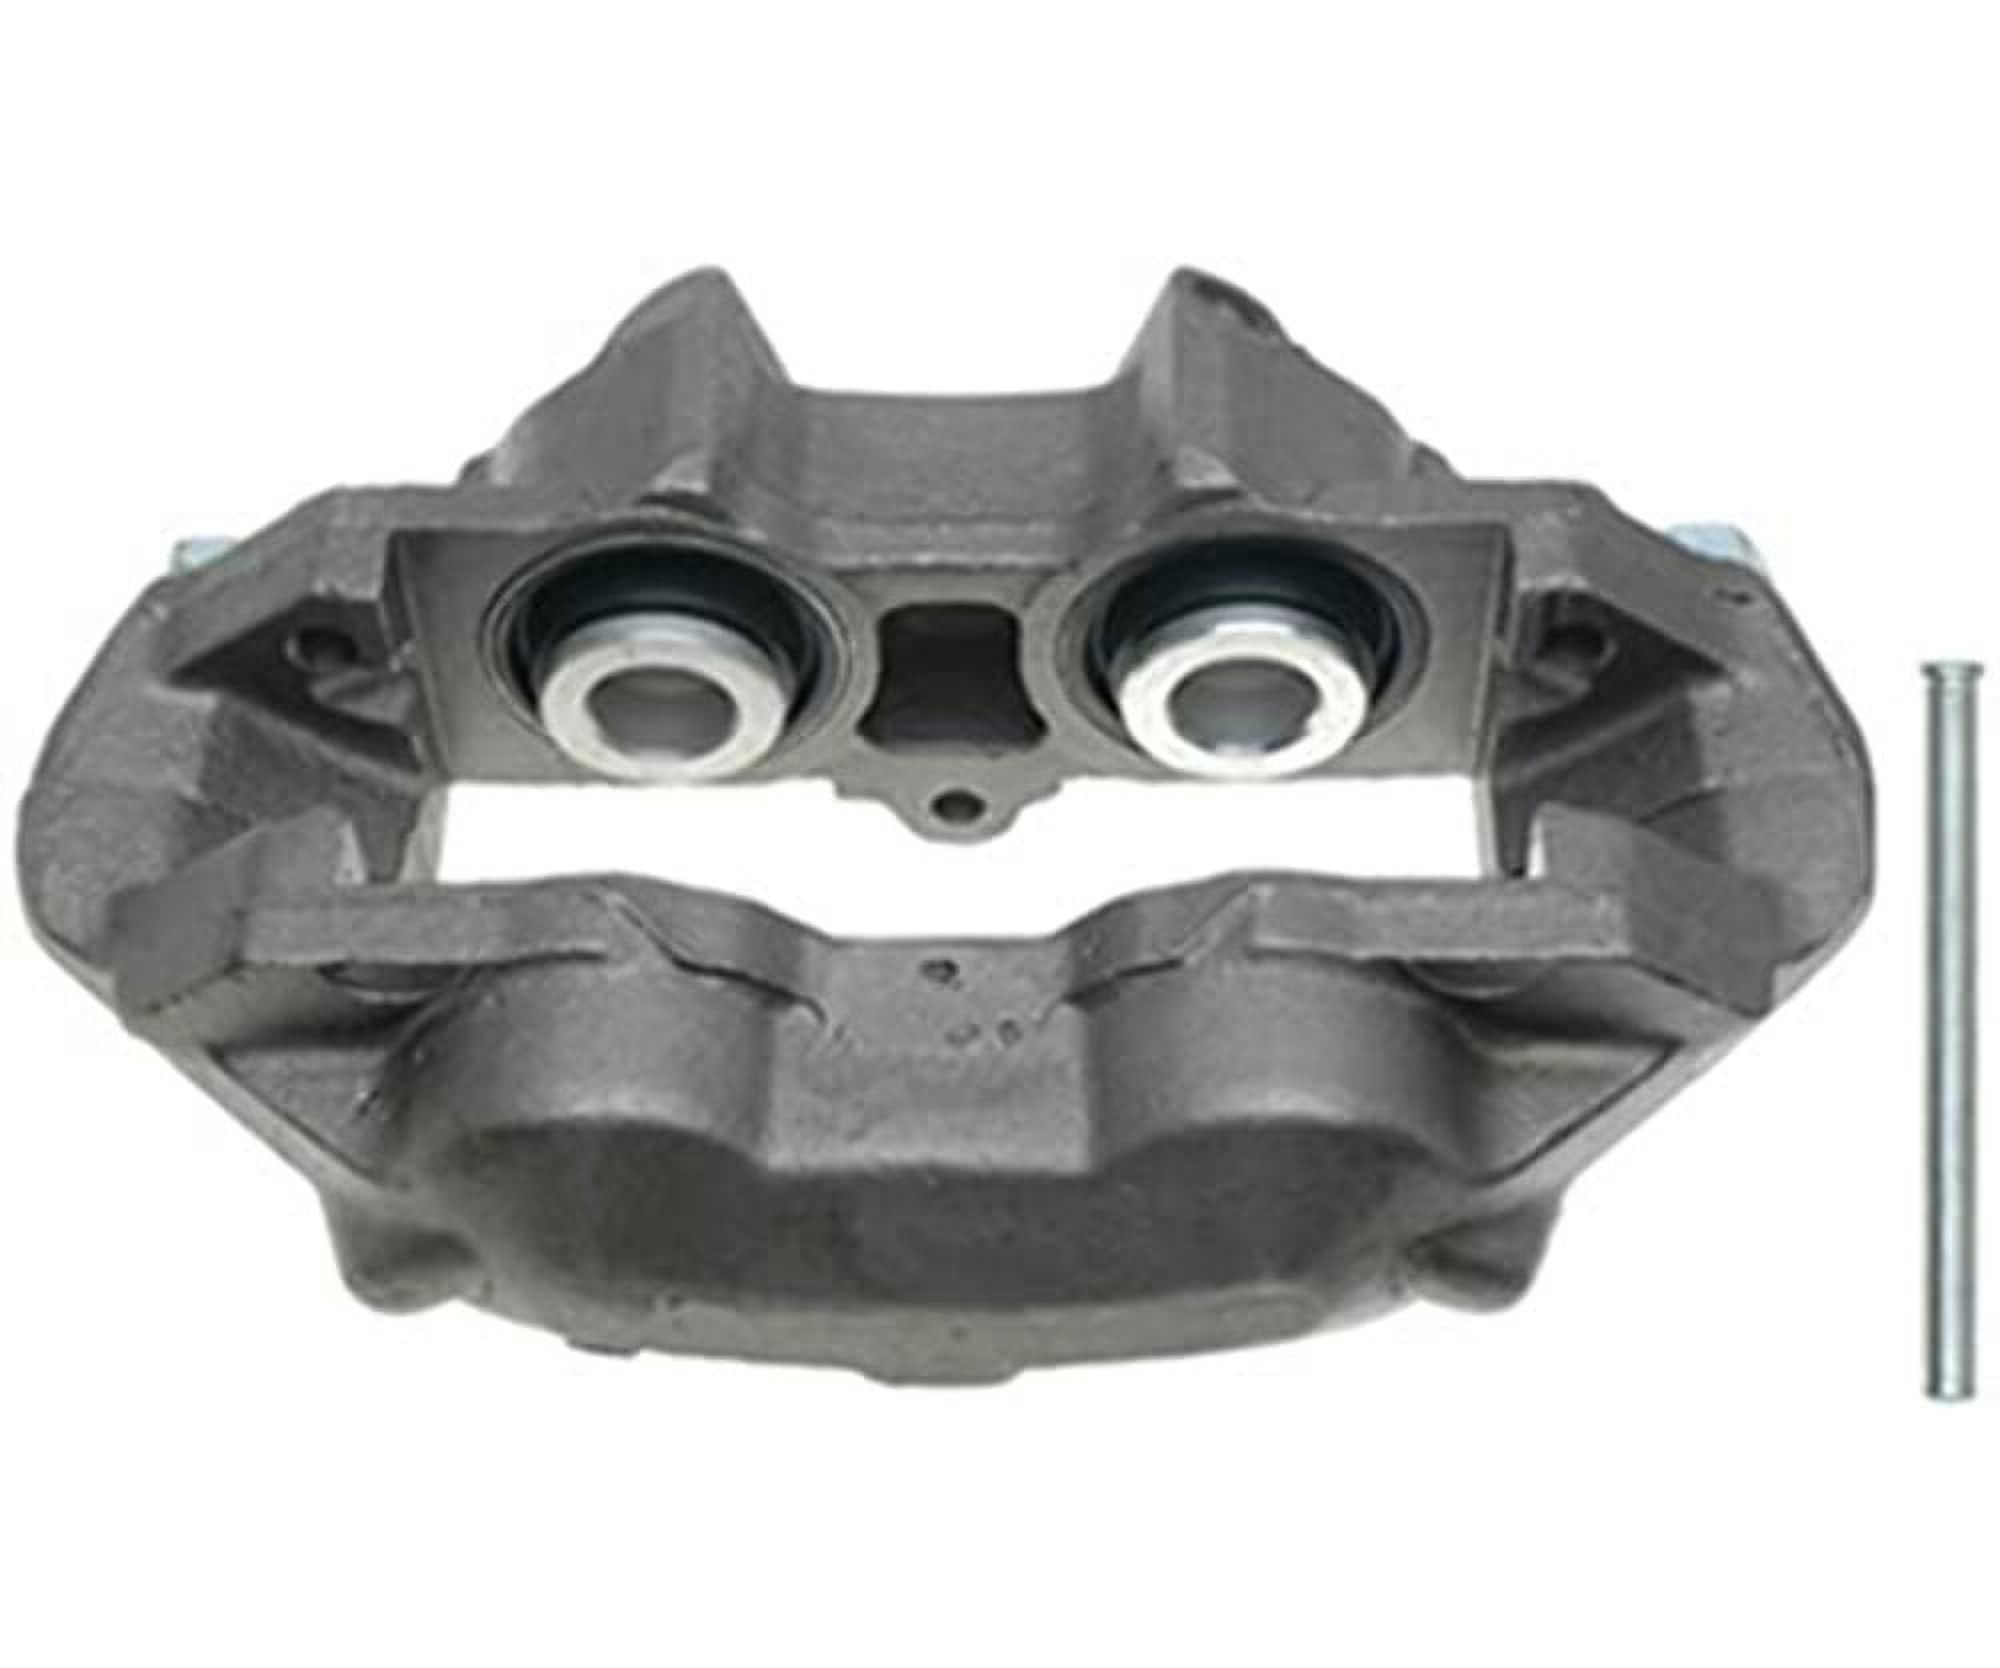 Raybestos RC8001 Professional Grade Remanufactured Loaded Disc Brake Caliper Fits select: 1966-1982 CHEVROLET CORVETTE - image 5 of 6